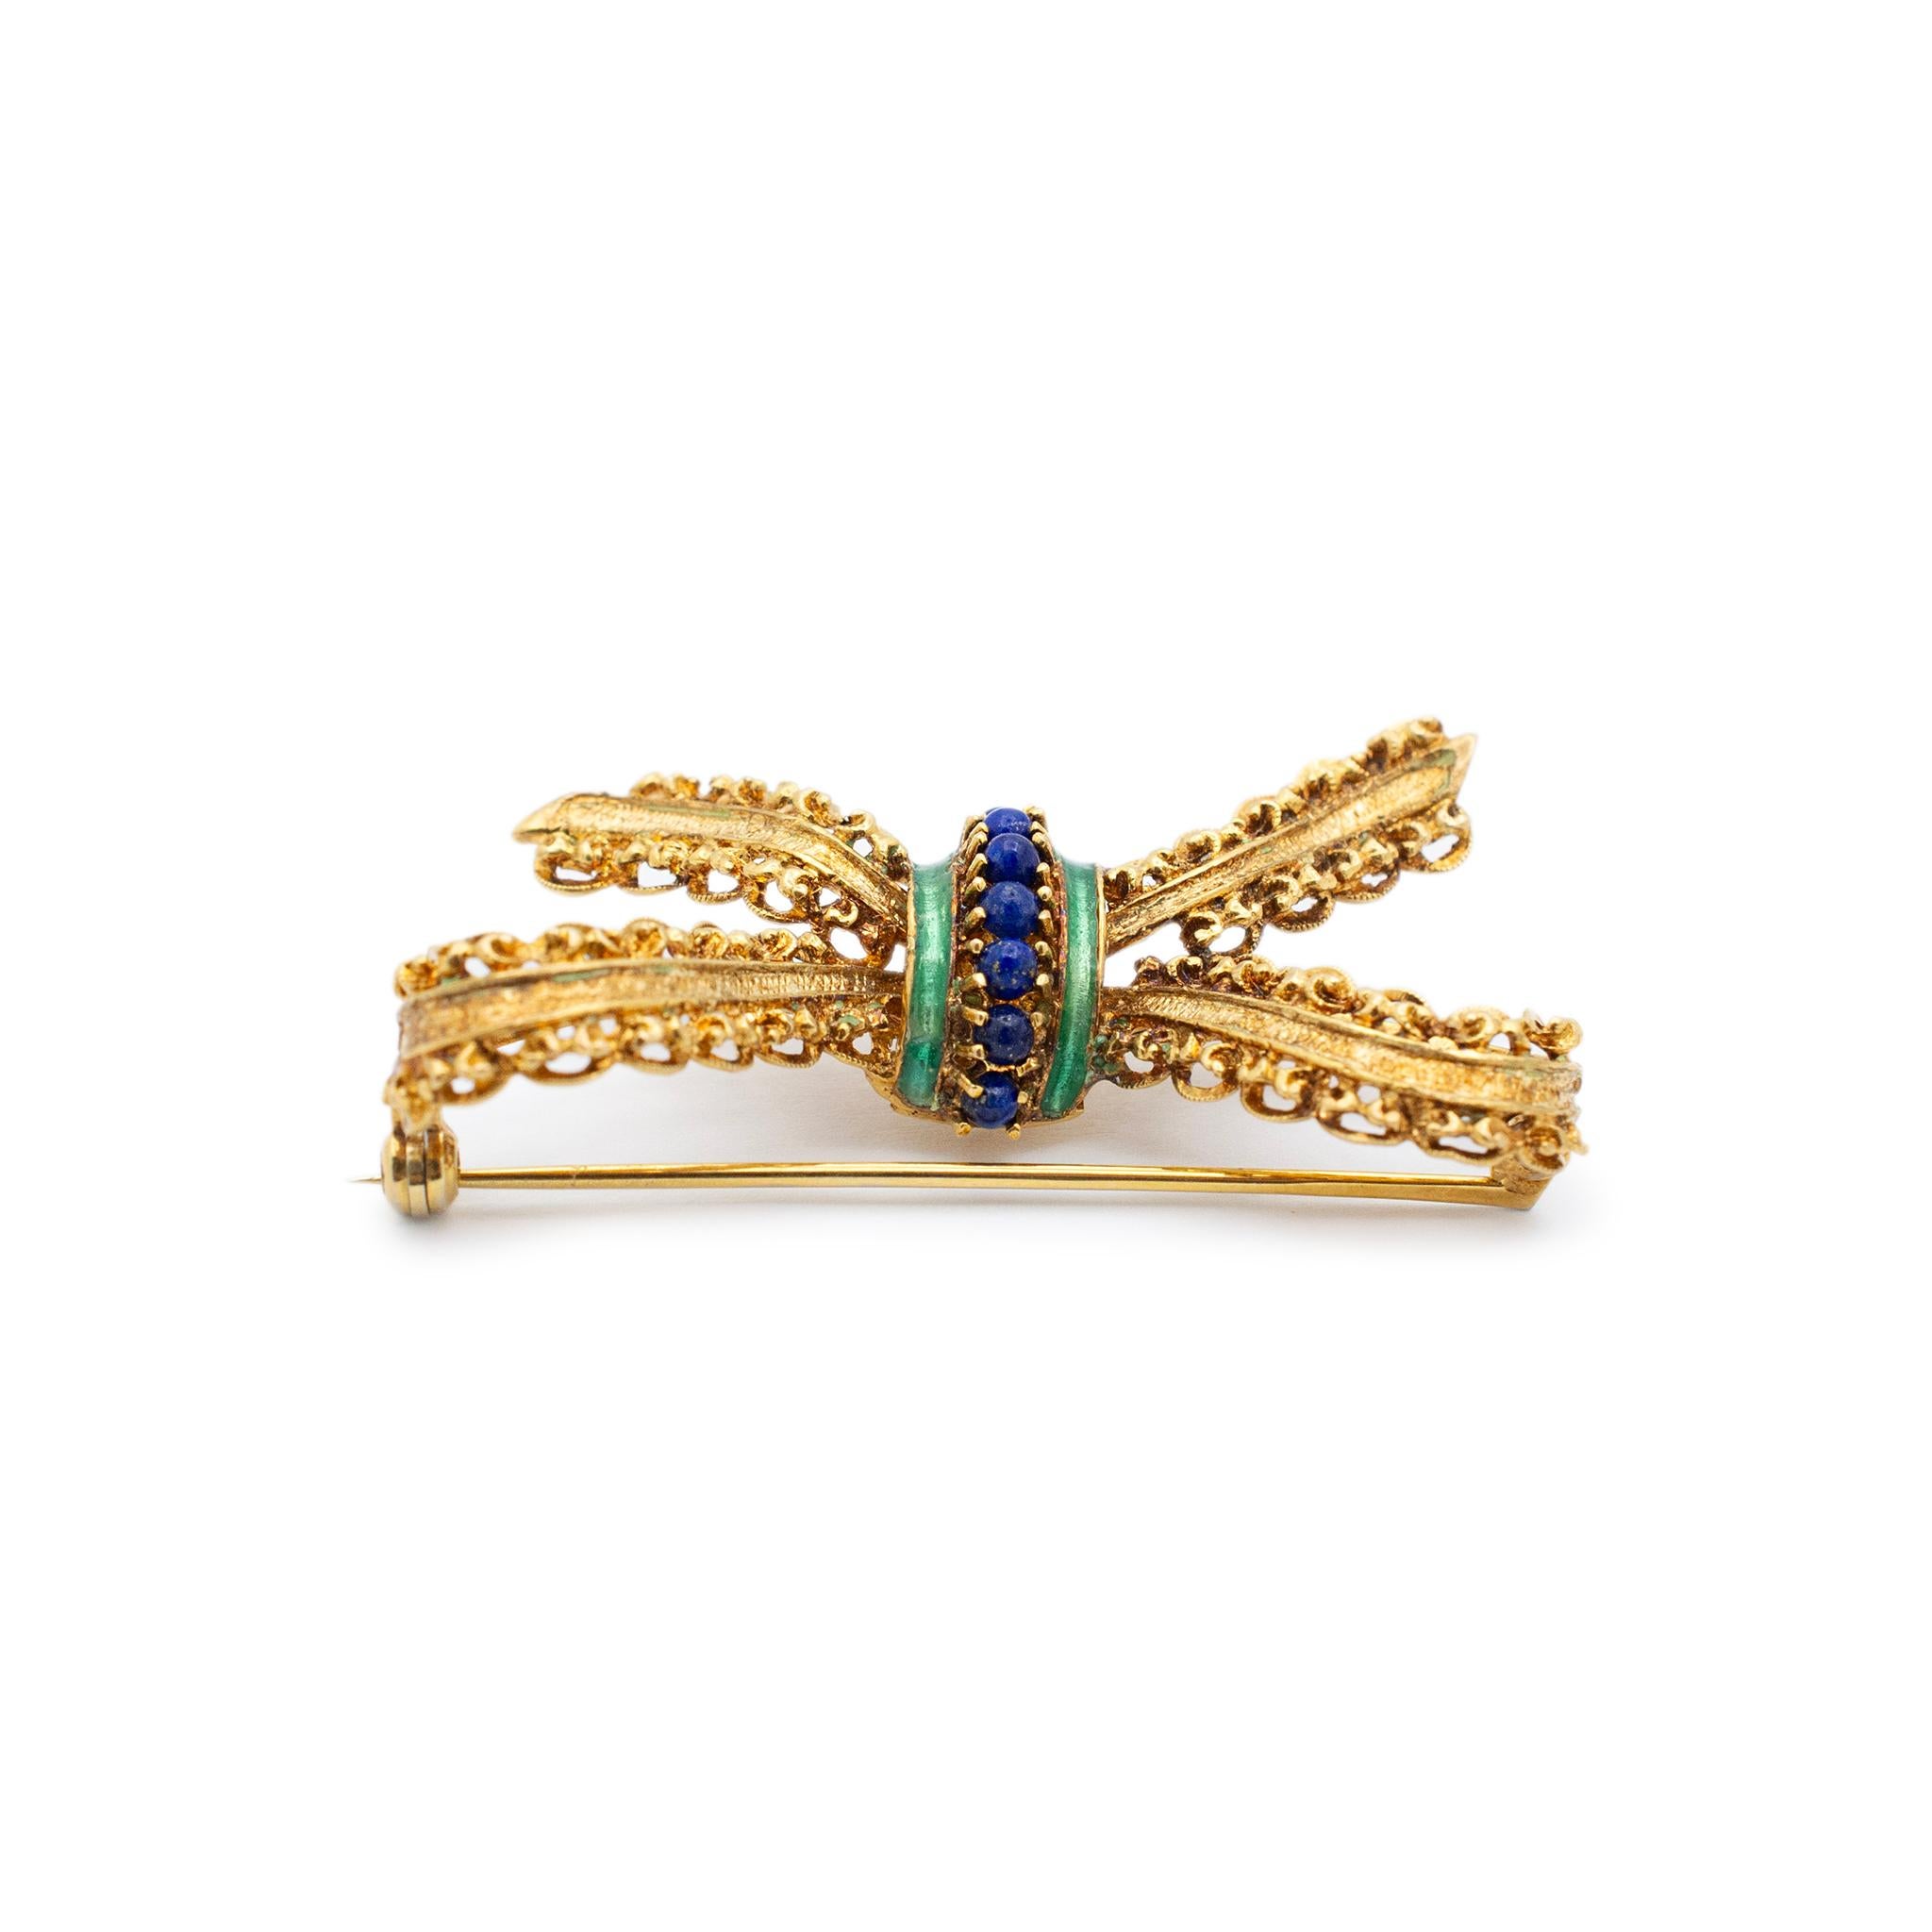 Metal Type: 18K Yellow Gold

Length: 0.75 inches

Width: 1.75 inches

Weght: 8.34 grams

Handmade 18K yellow gold bow lapis lazuli vintage brooch. The metal was tested and determined to be 18K yellow gold. Engraved with 